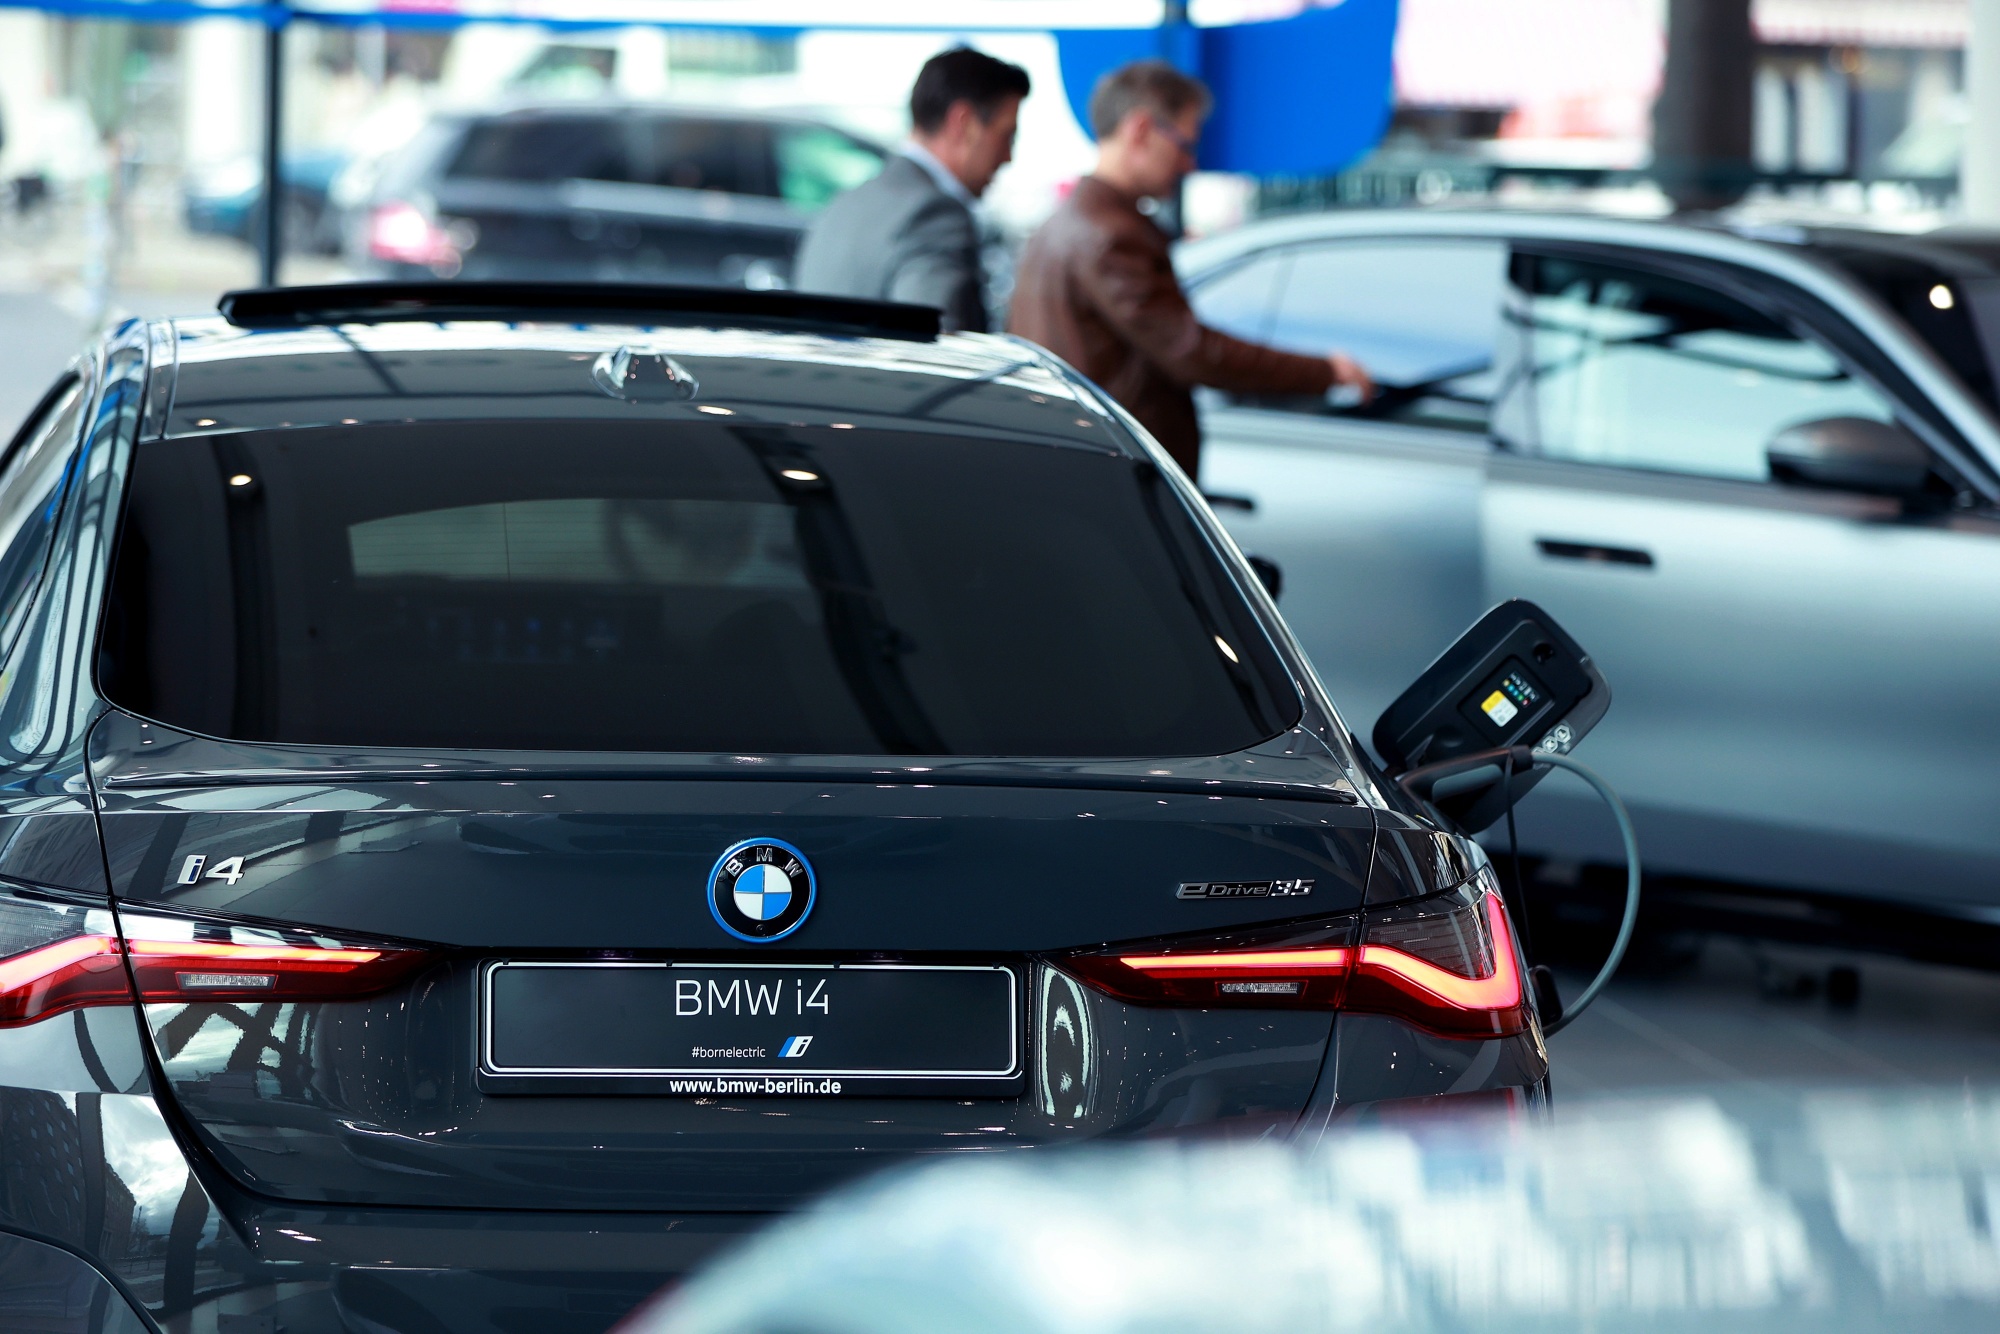 BMW, Tesla And Other Used Electric Cars Are Proving Tough To Sell -  Bloomberg